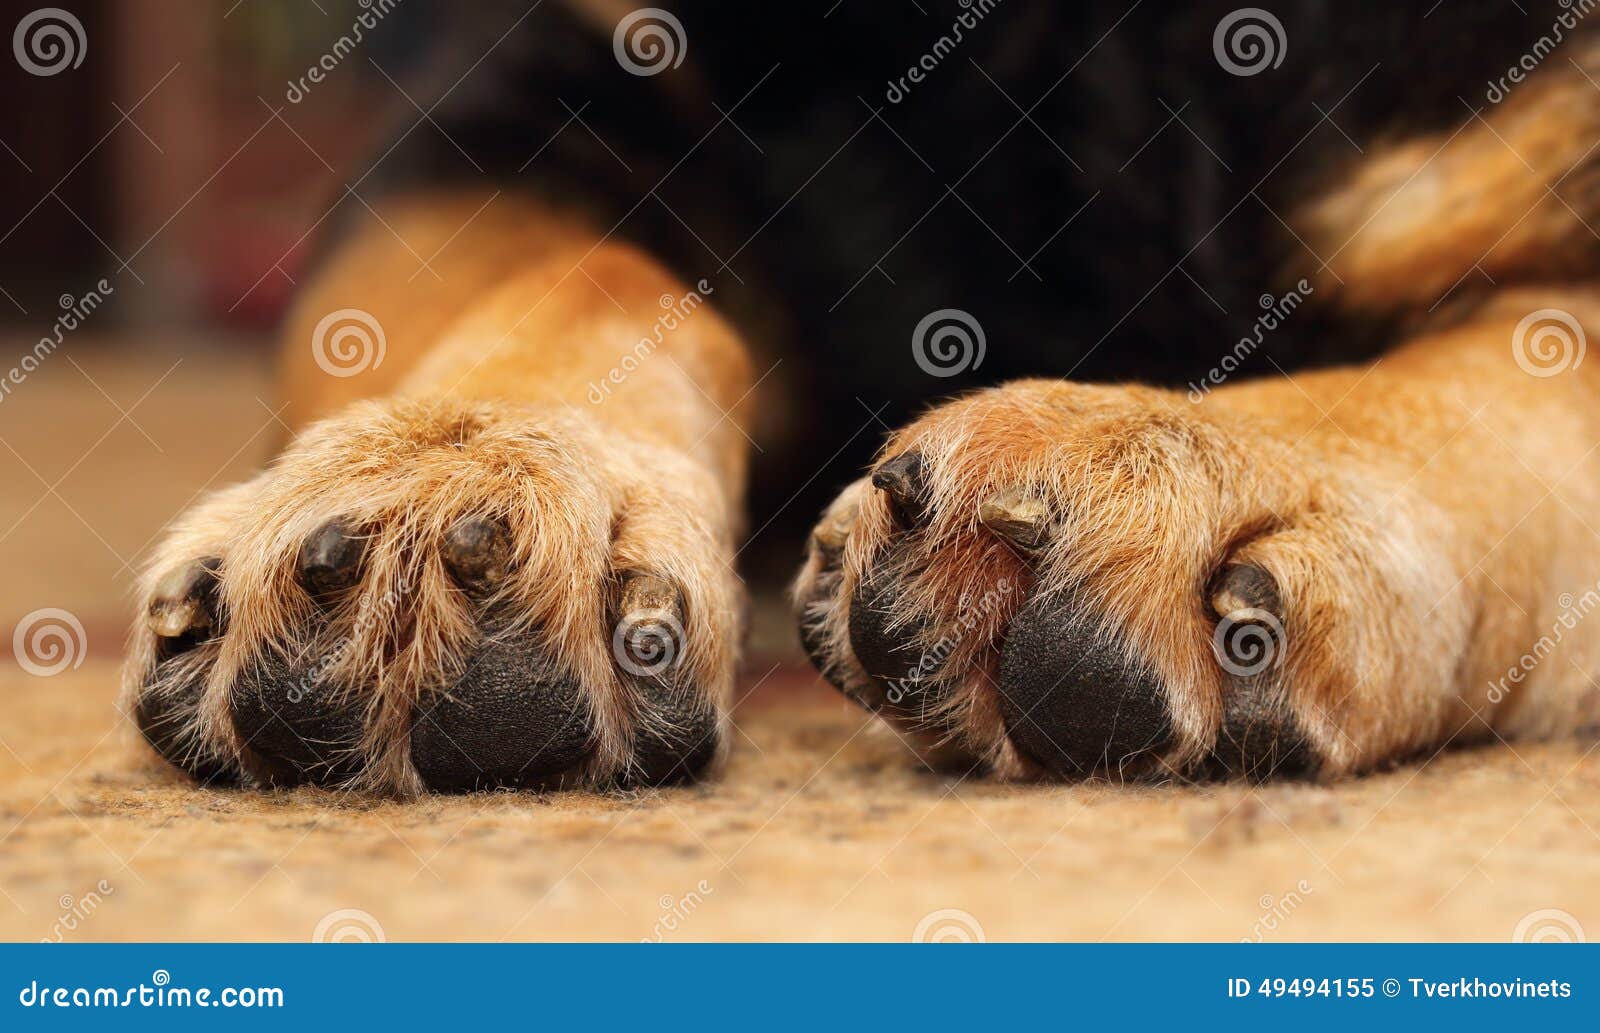 dogs paws